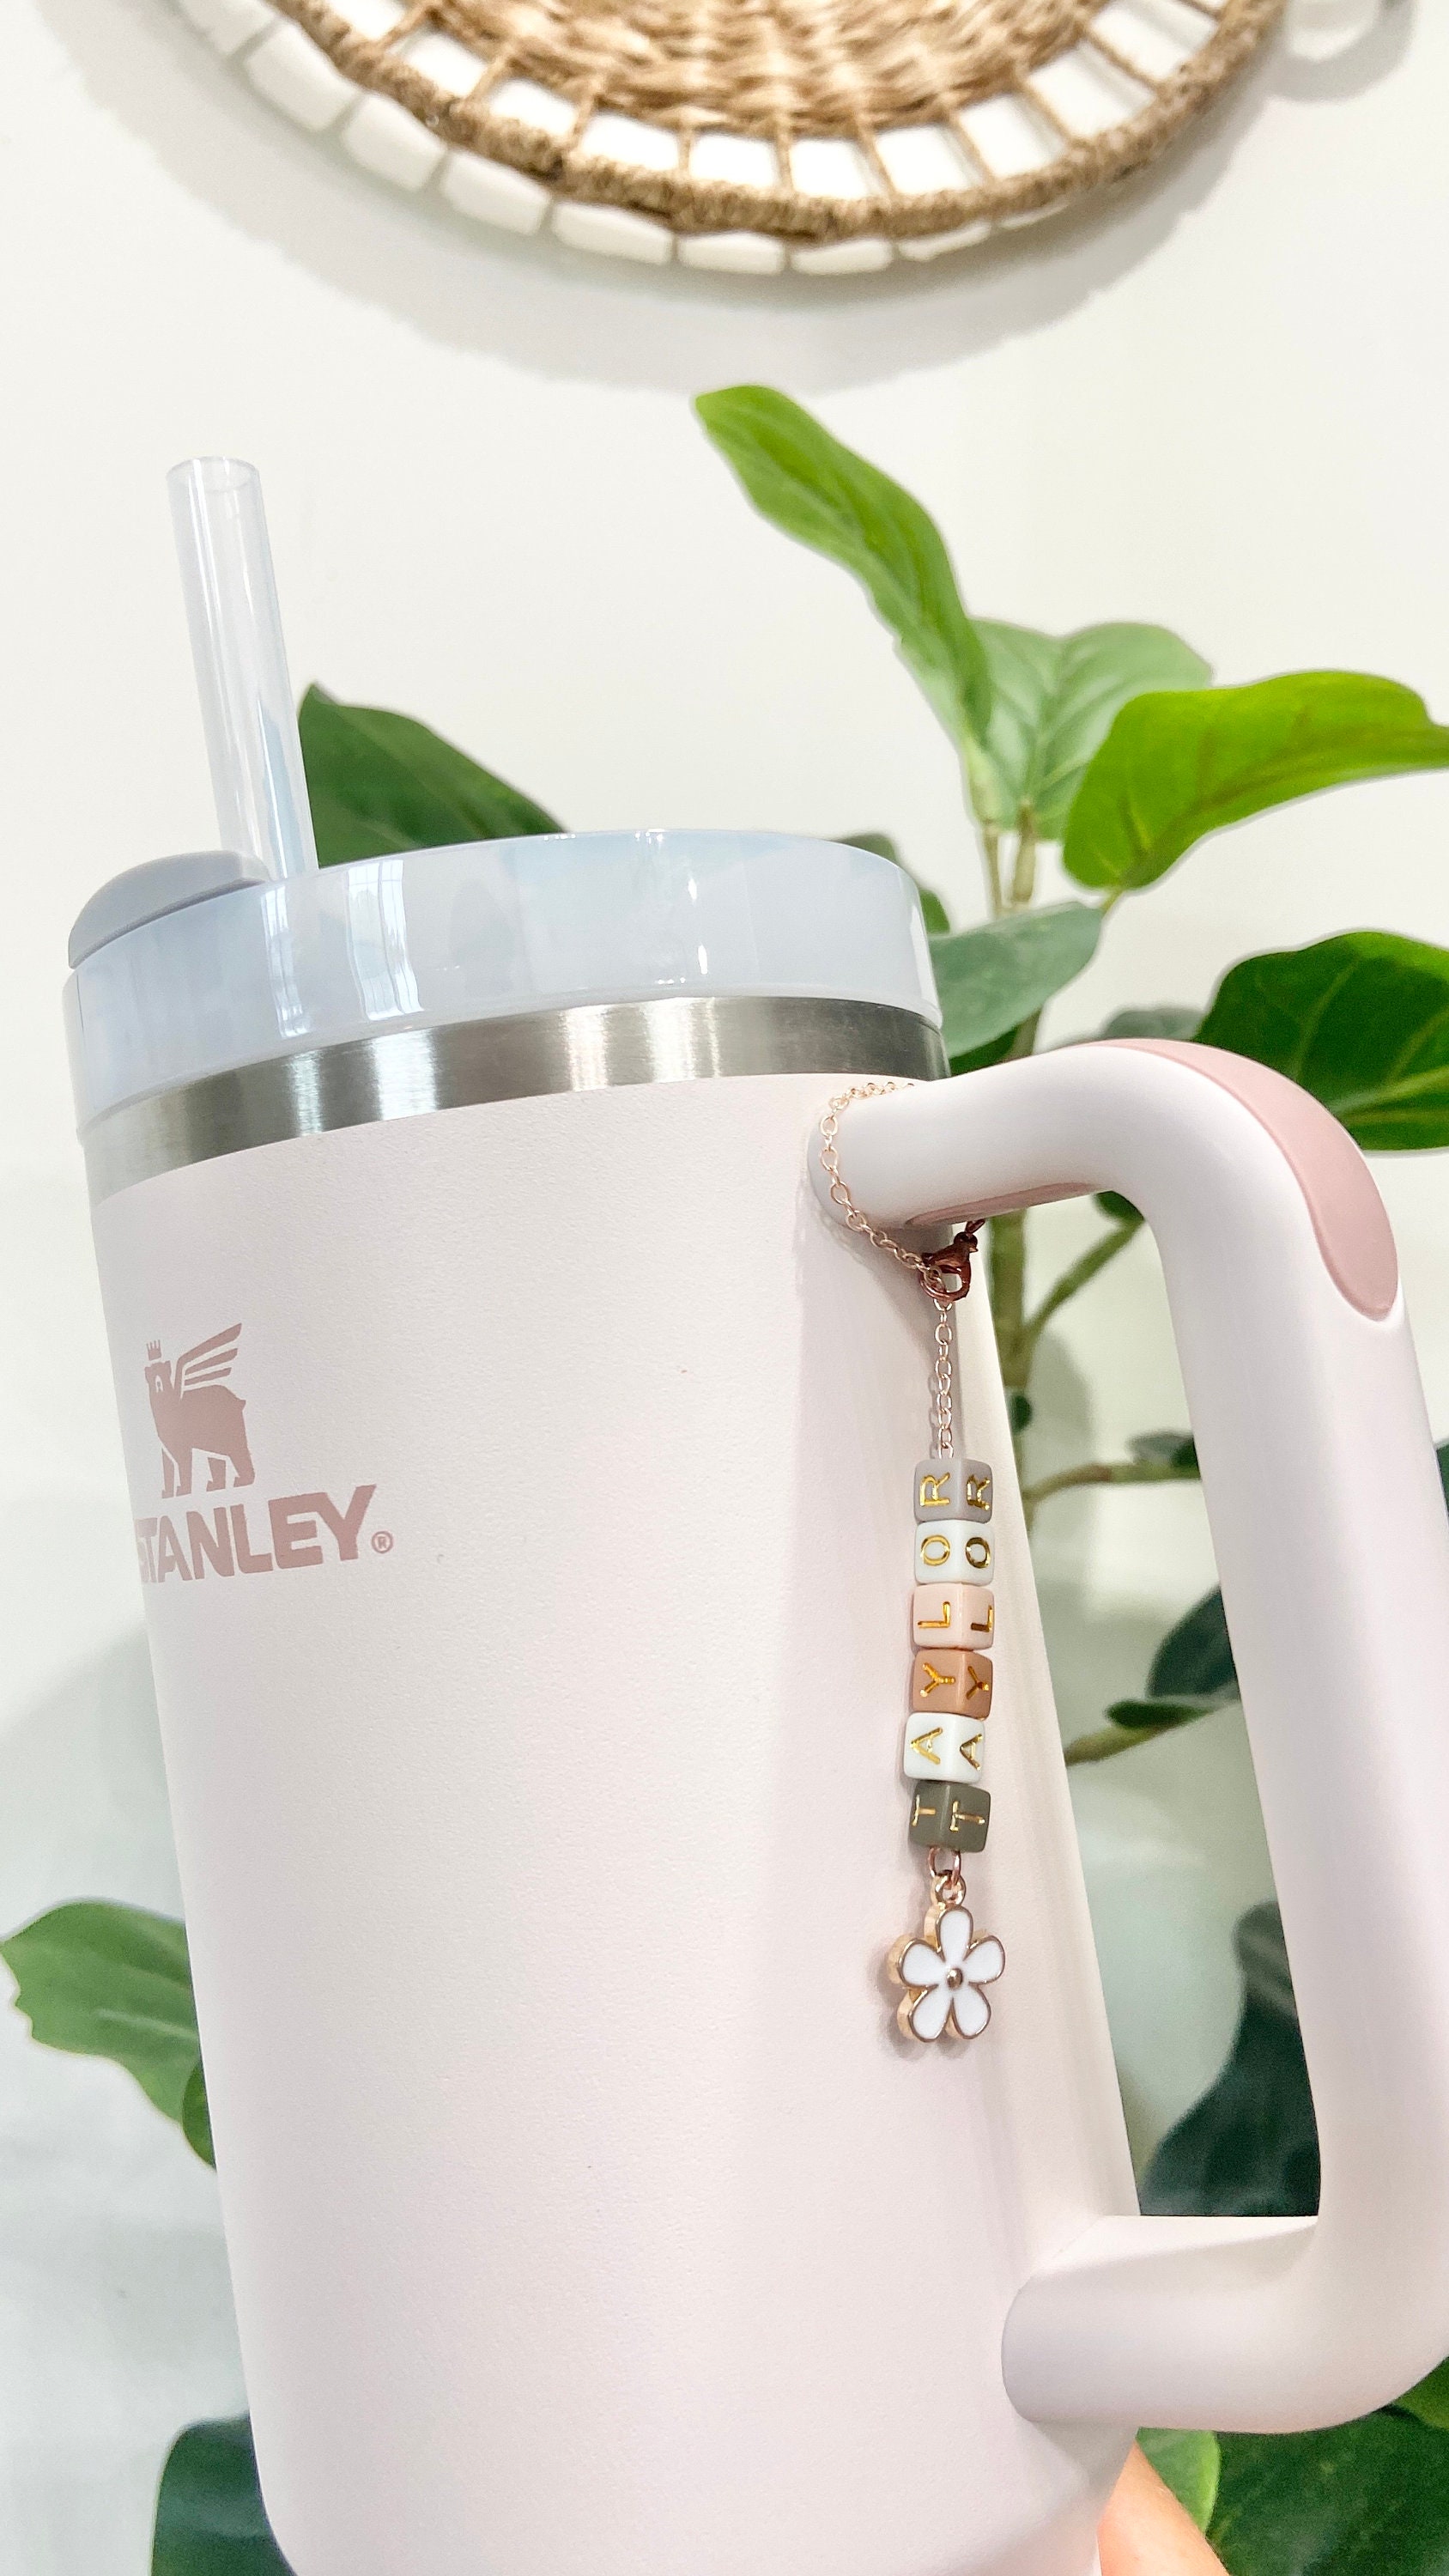 Stanley Tumbler Charm Stanley Accessory Water Bottle Charm Cup Charm S –  J&J Designs